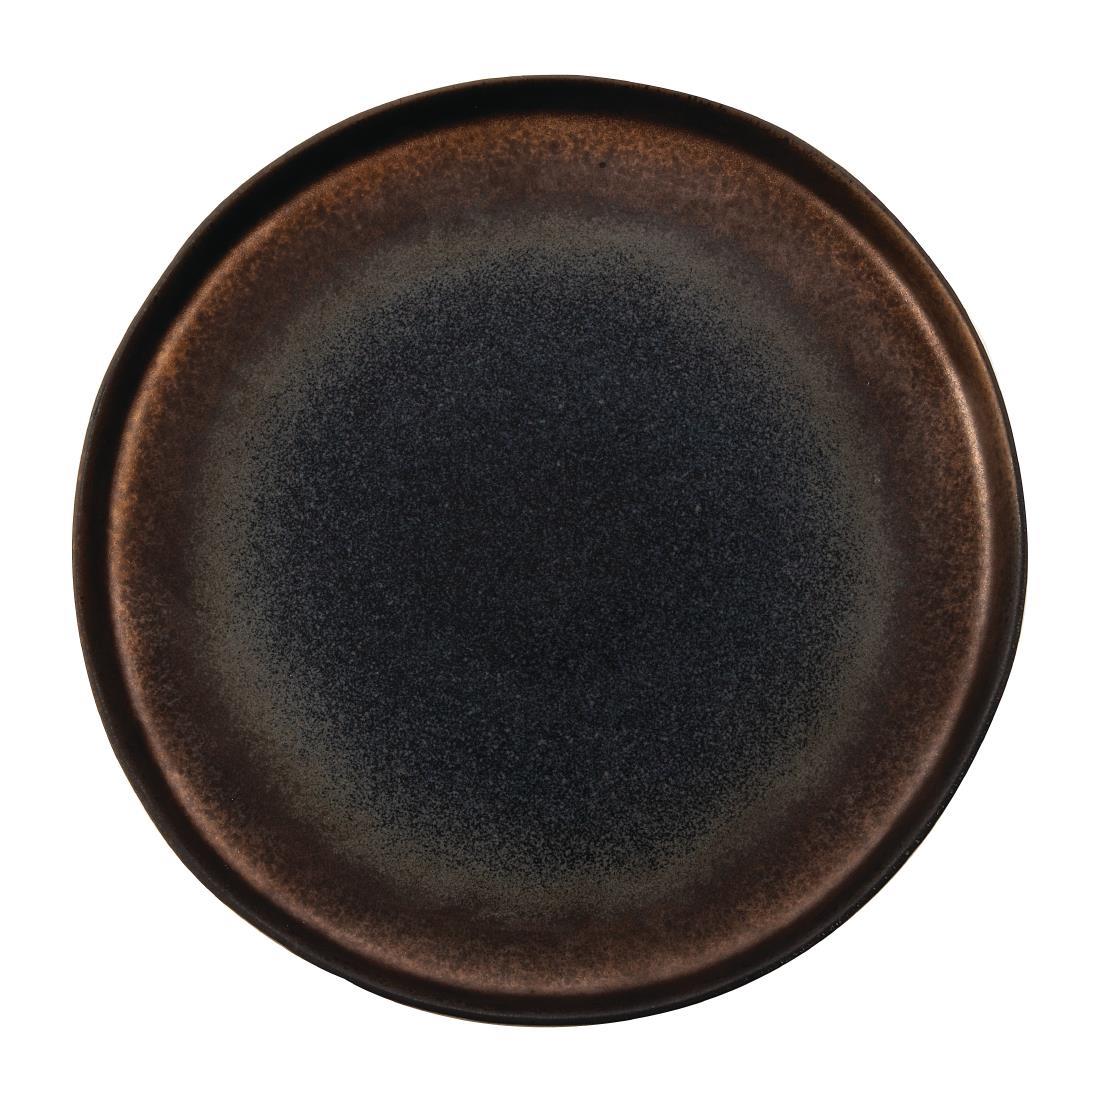 Olympia Ochre Flat Plates 220mm (Pack of 6) - FC286  - 1